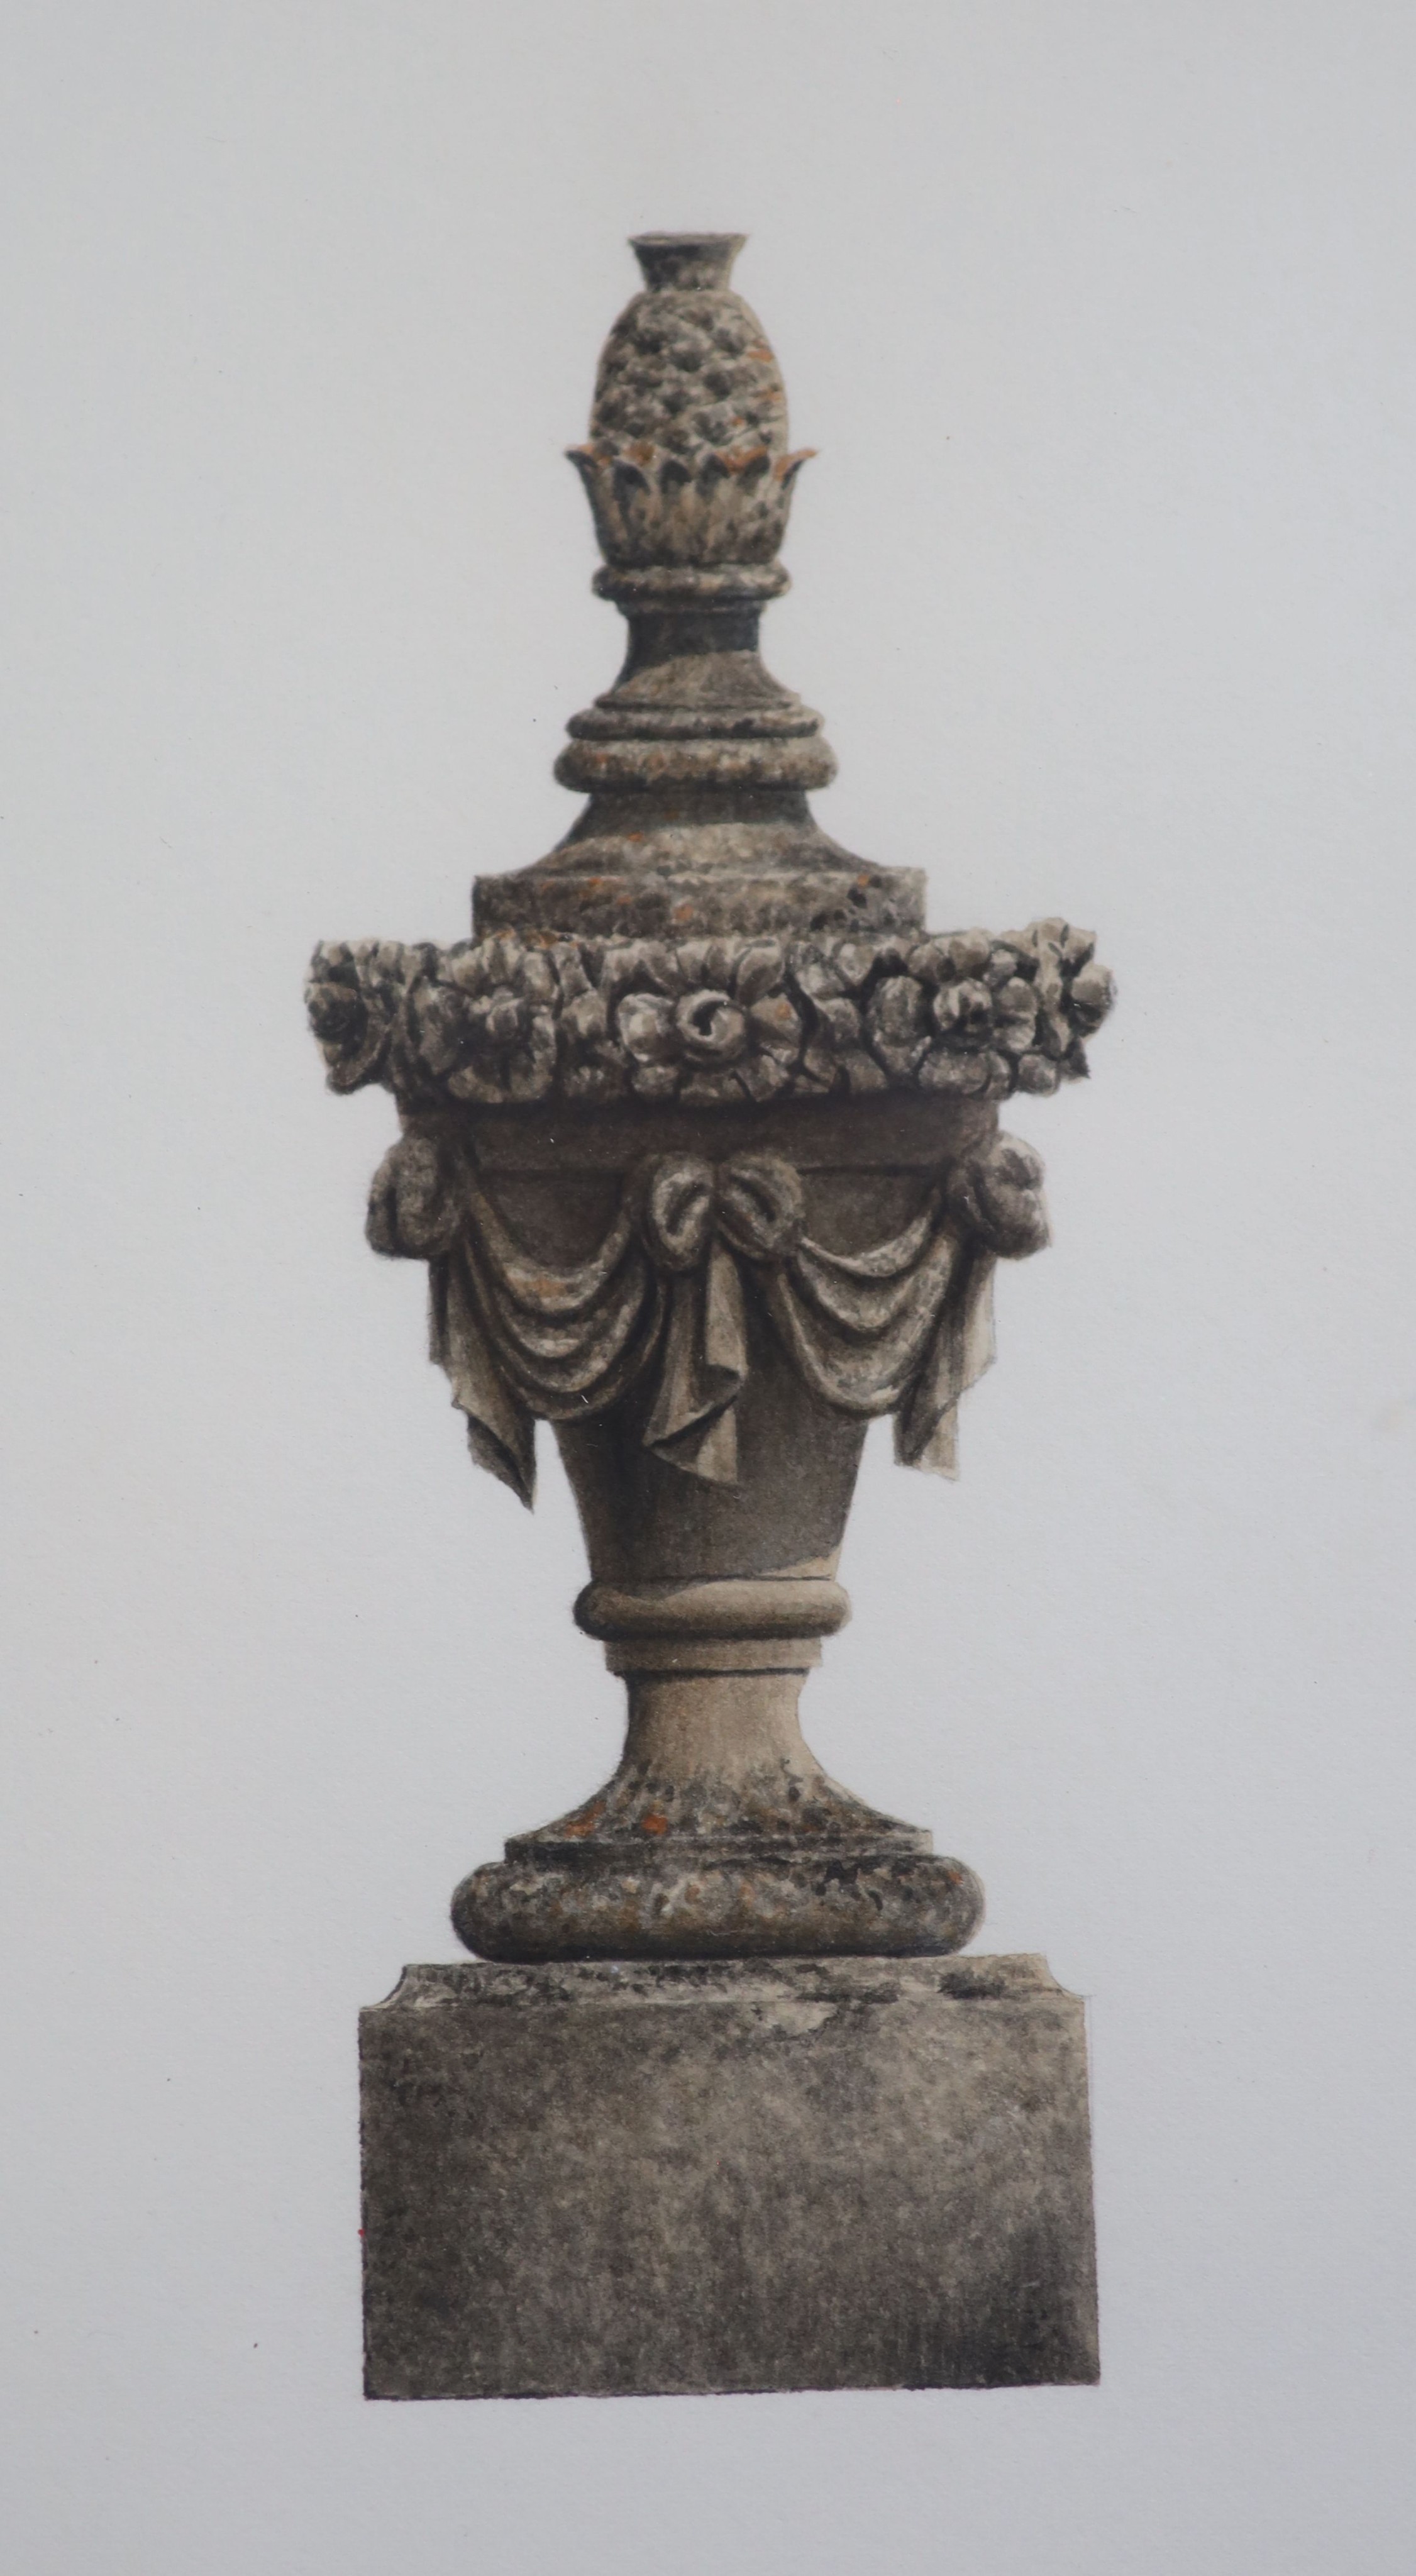 19th century English School, Studies of stone garden urns from Ven House, Somerset and Bow Wood, pair of watercolours, 21.5 x 13.5cm